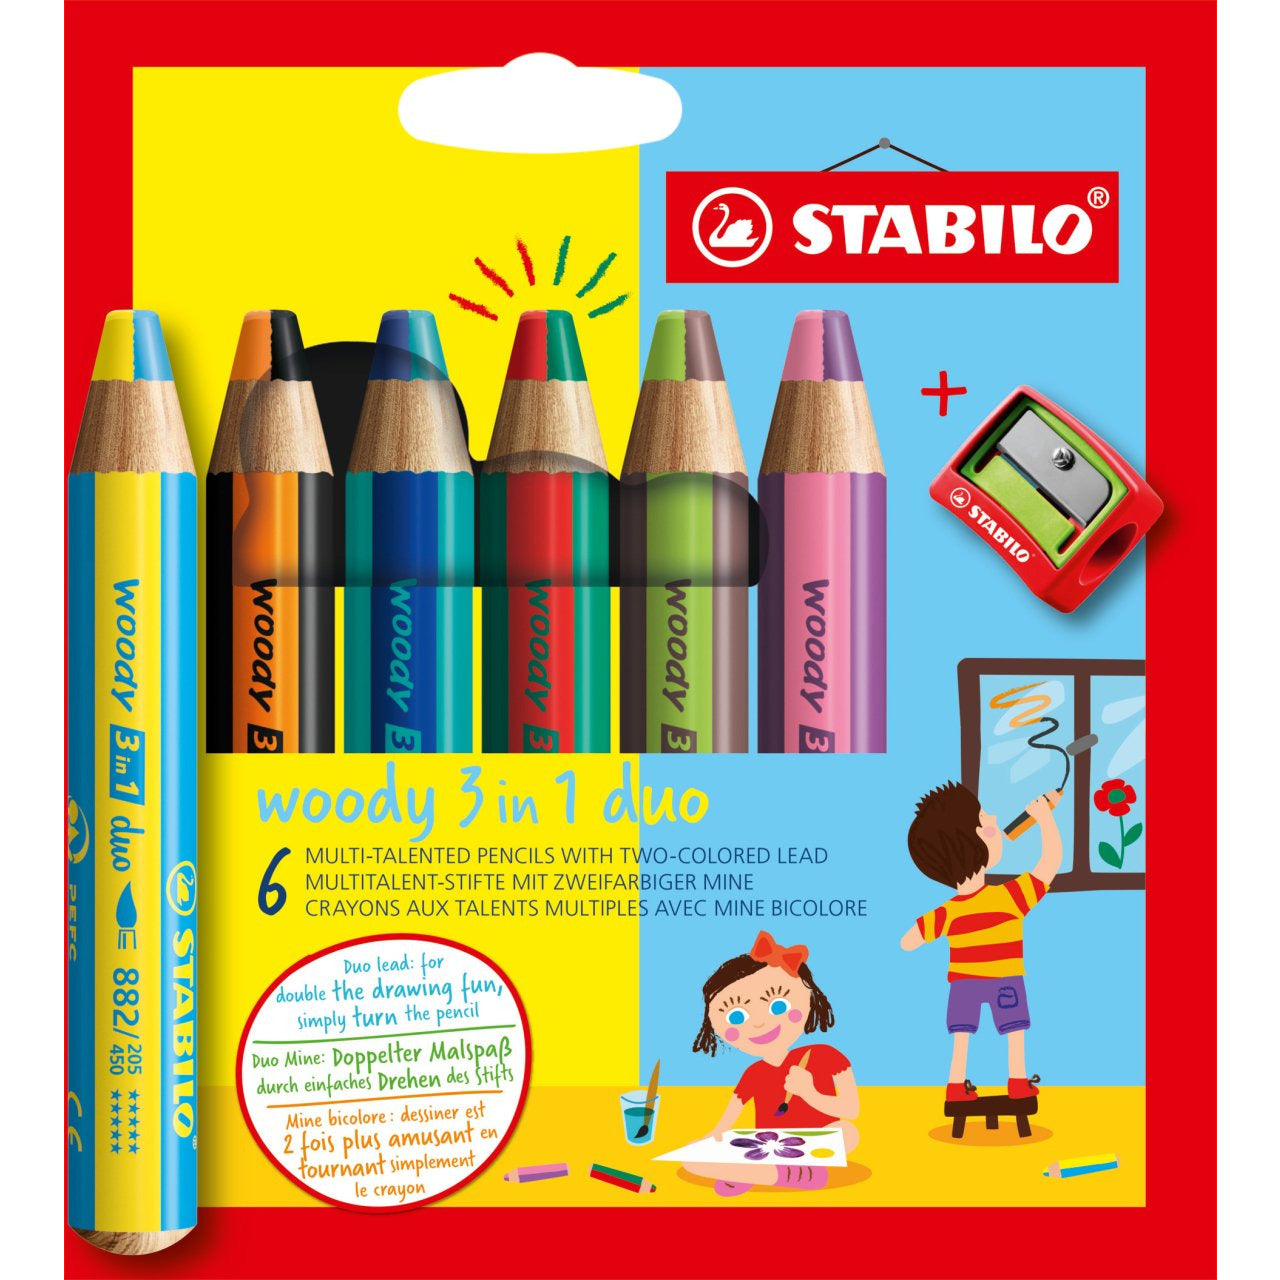 Stabilo Woody 3-in-1 Colour Pencils - Duo